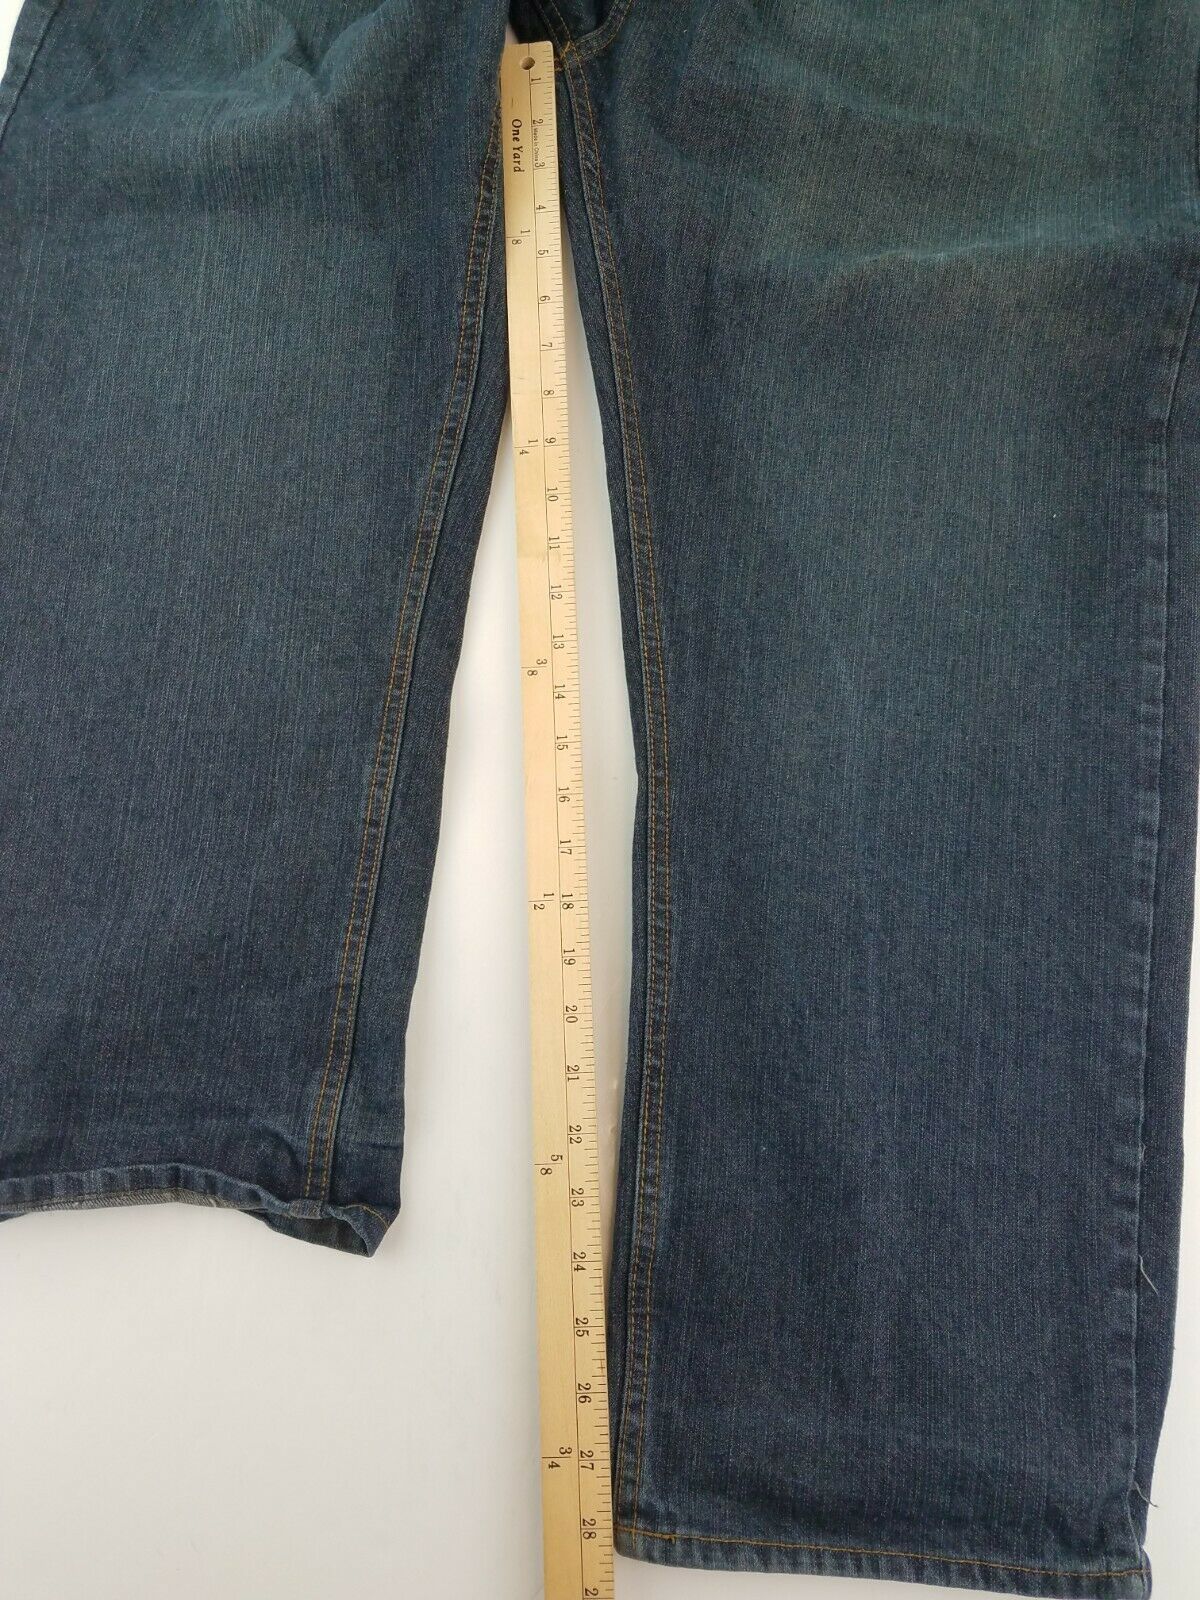 Beverly Hills Polo Club Jeans Mens 44x30 Dark Wash Loose Fit A12-04 - Jeans